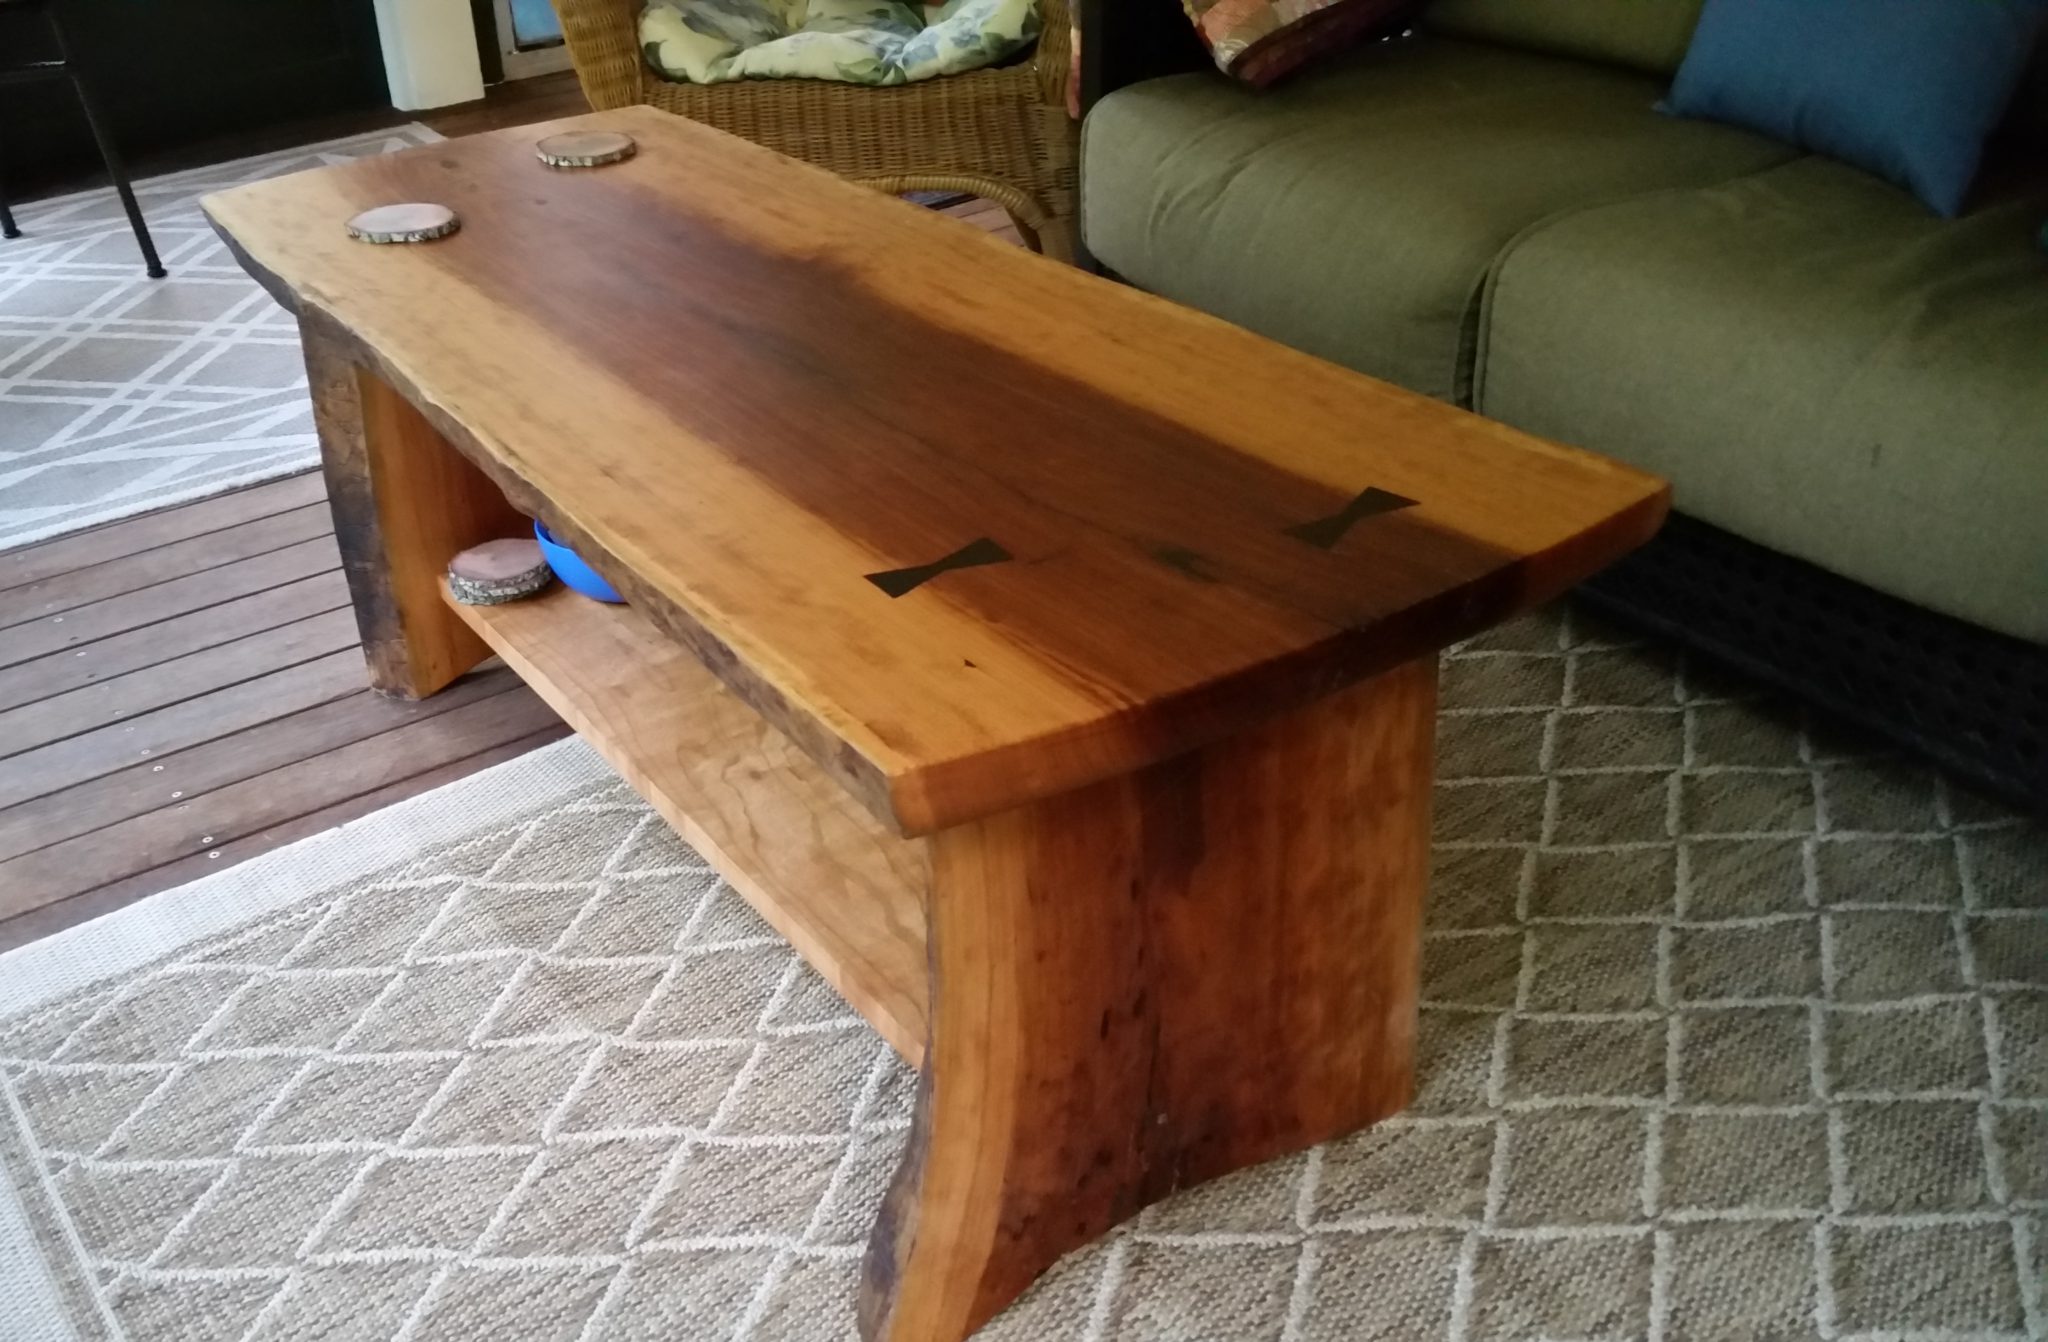 Live edge coffee table with wenge bowties inset